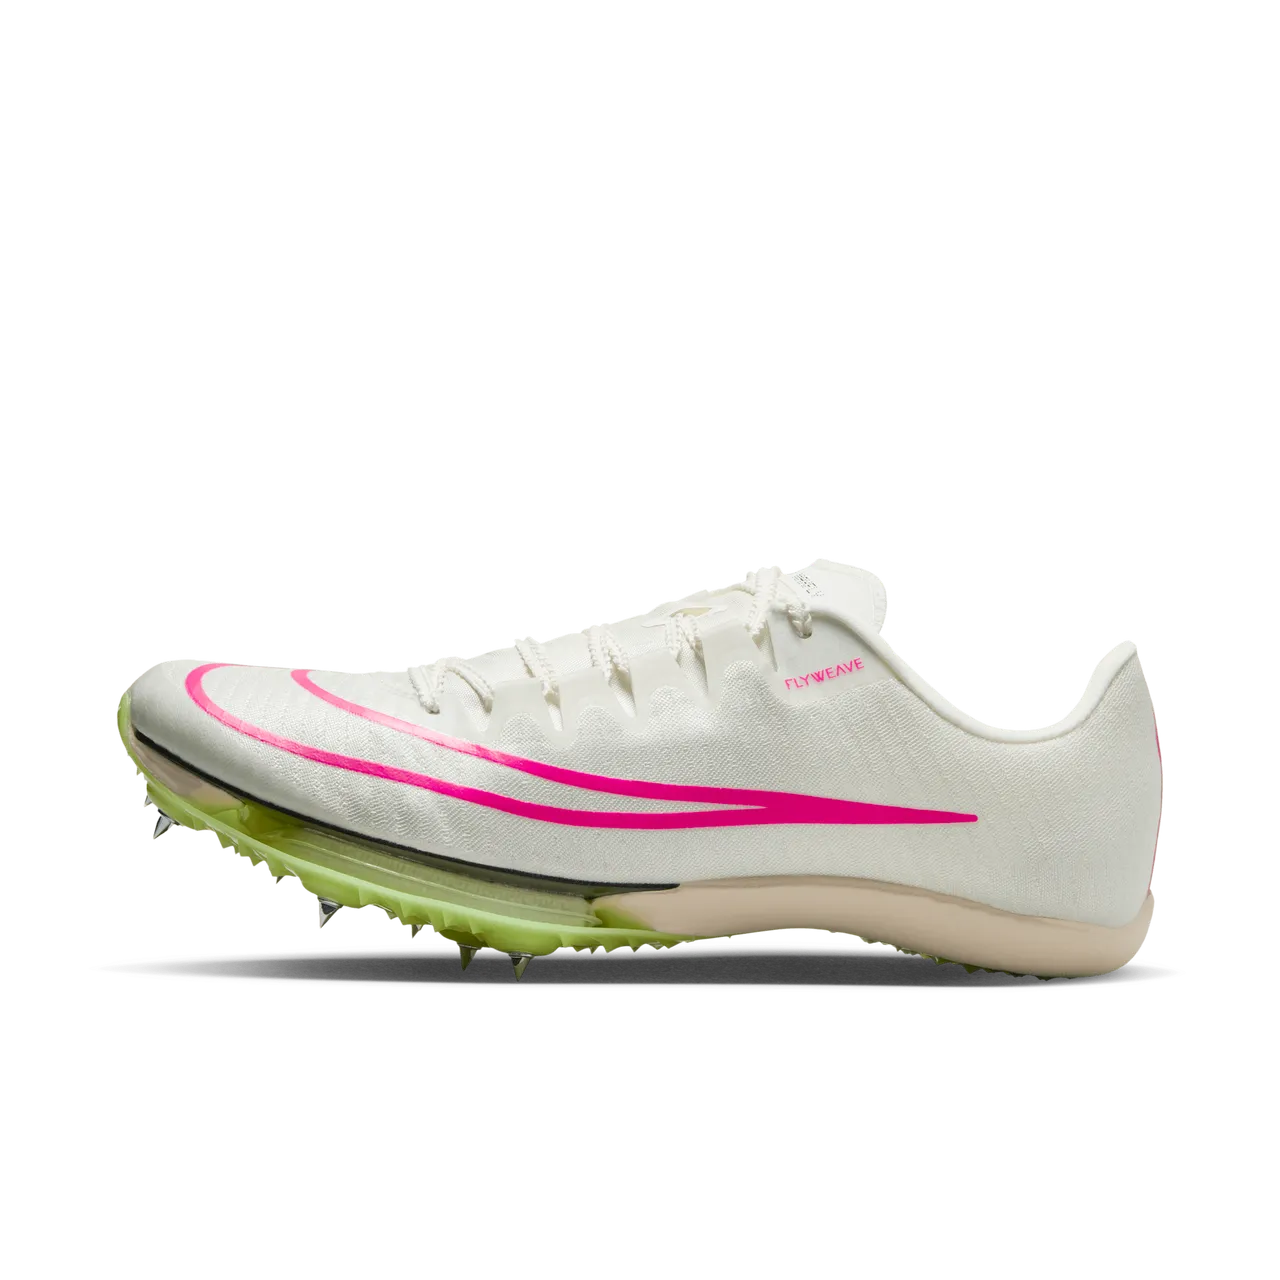 Nike Air Zoom Maxfly Athletics Sprinting Spikes - White